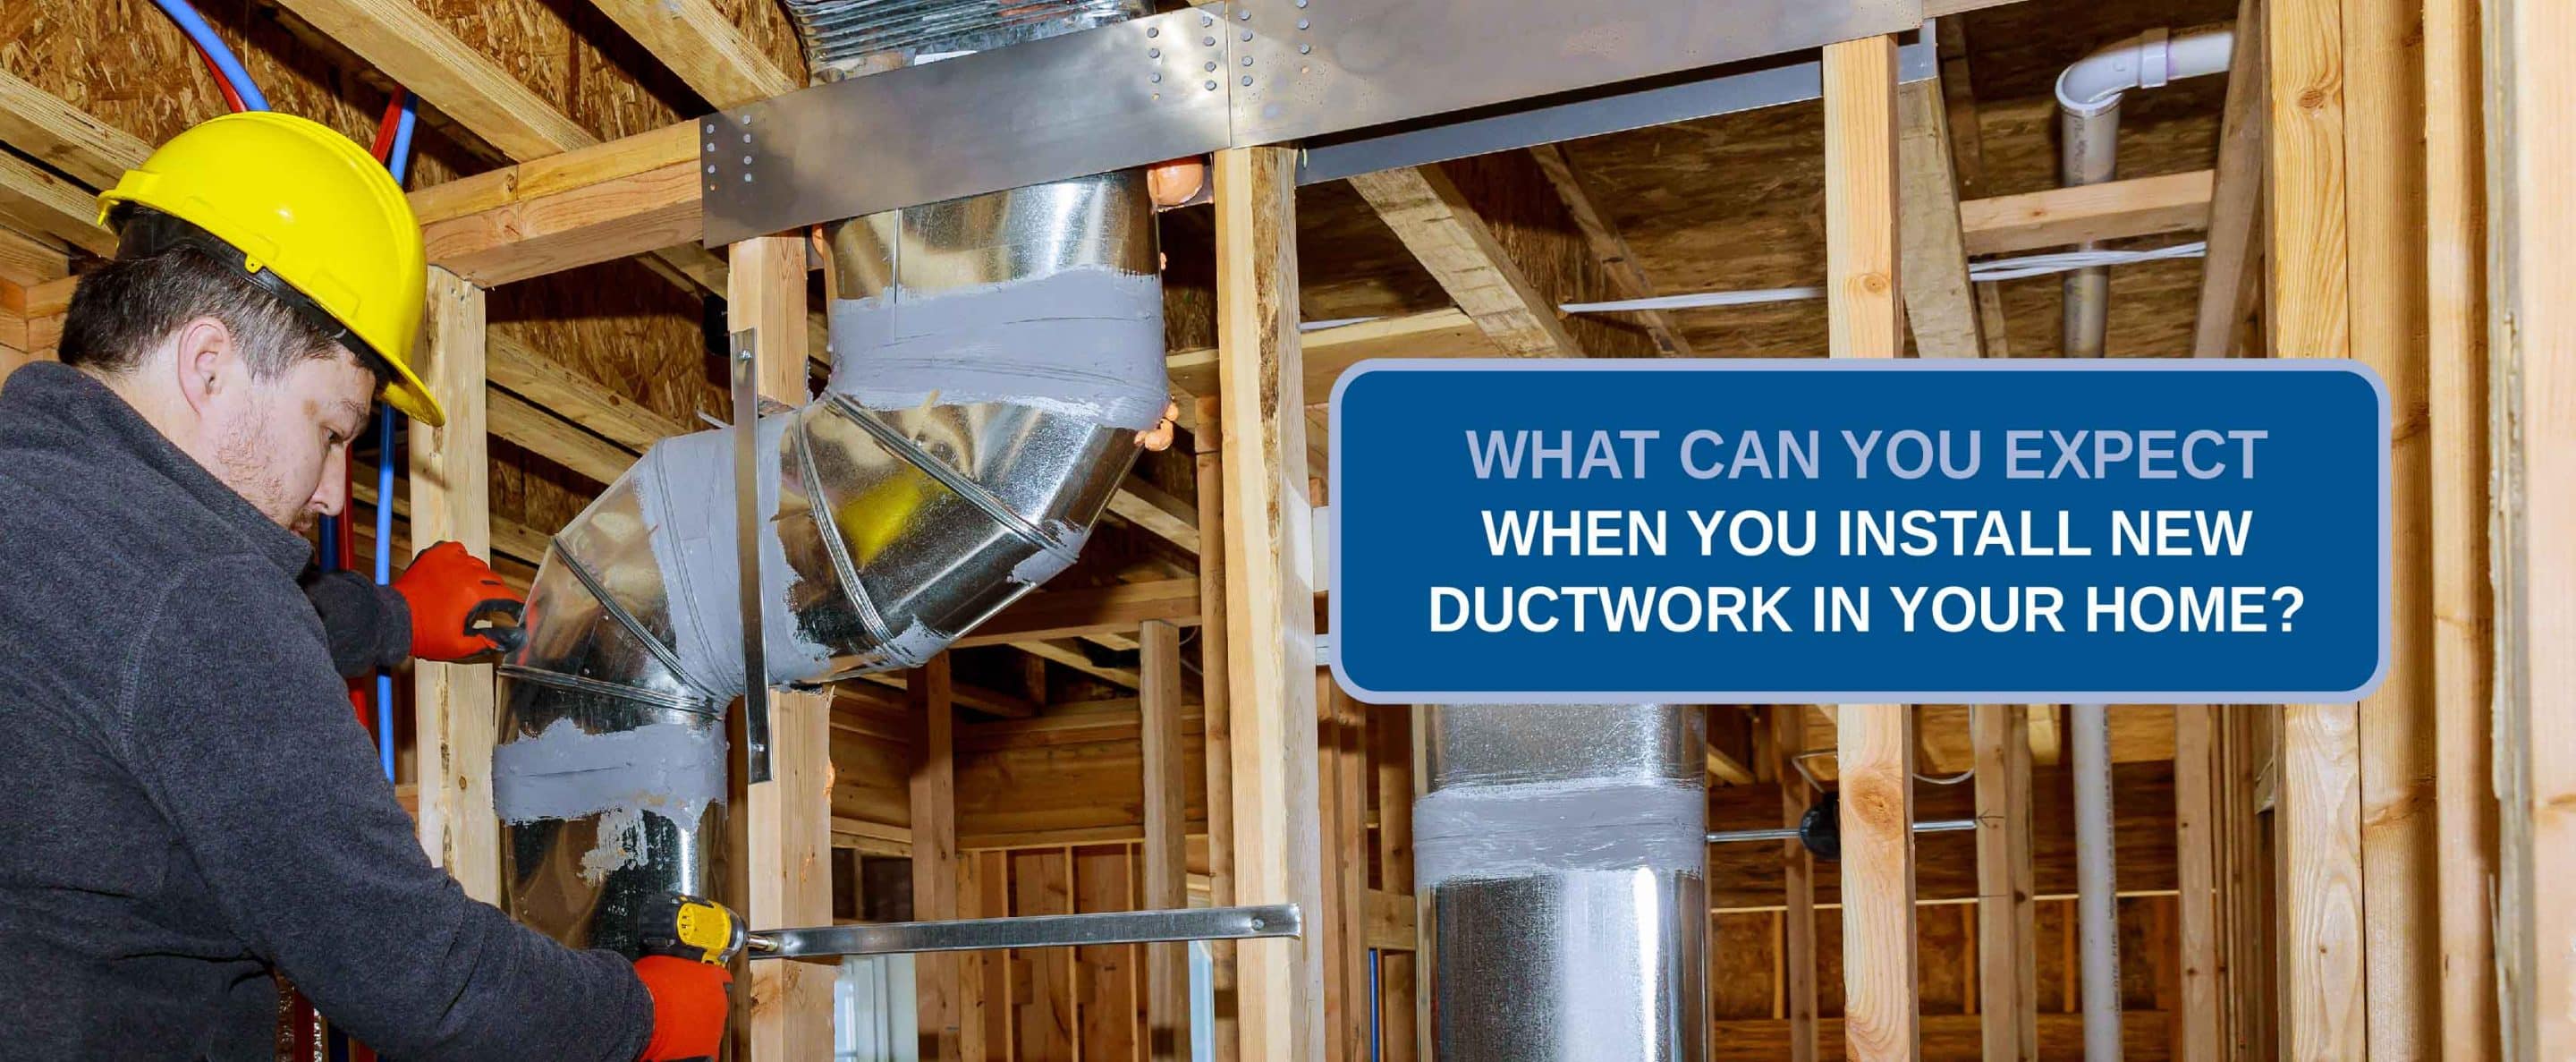 install new ductwork